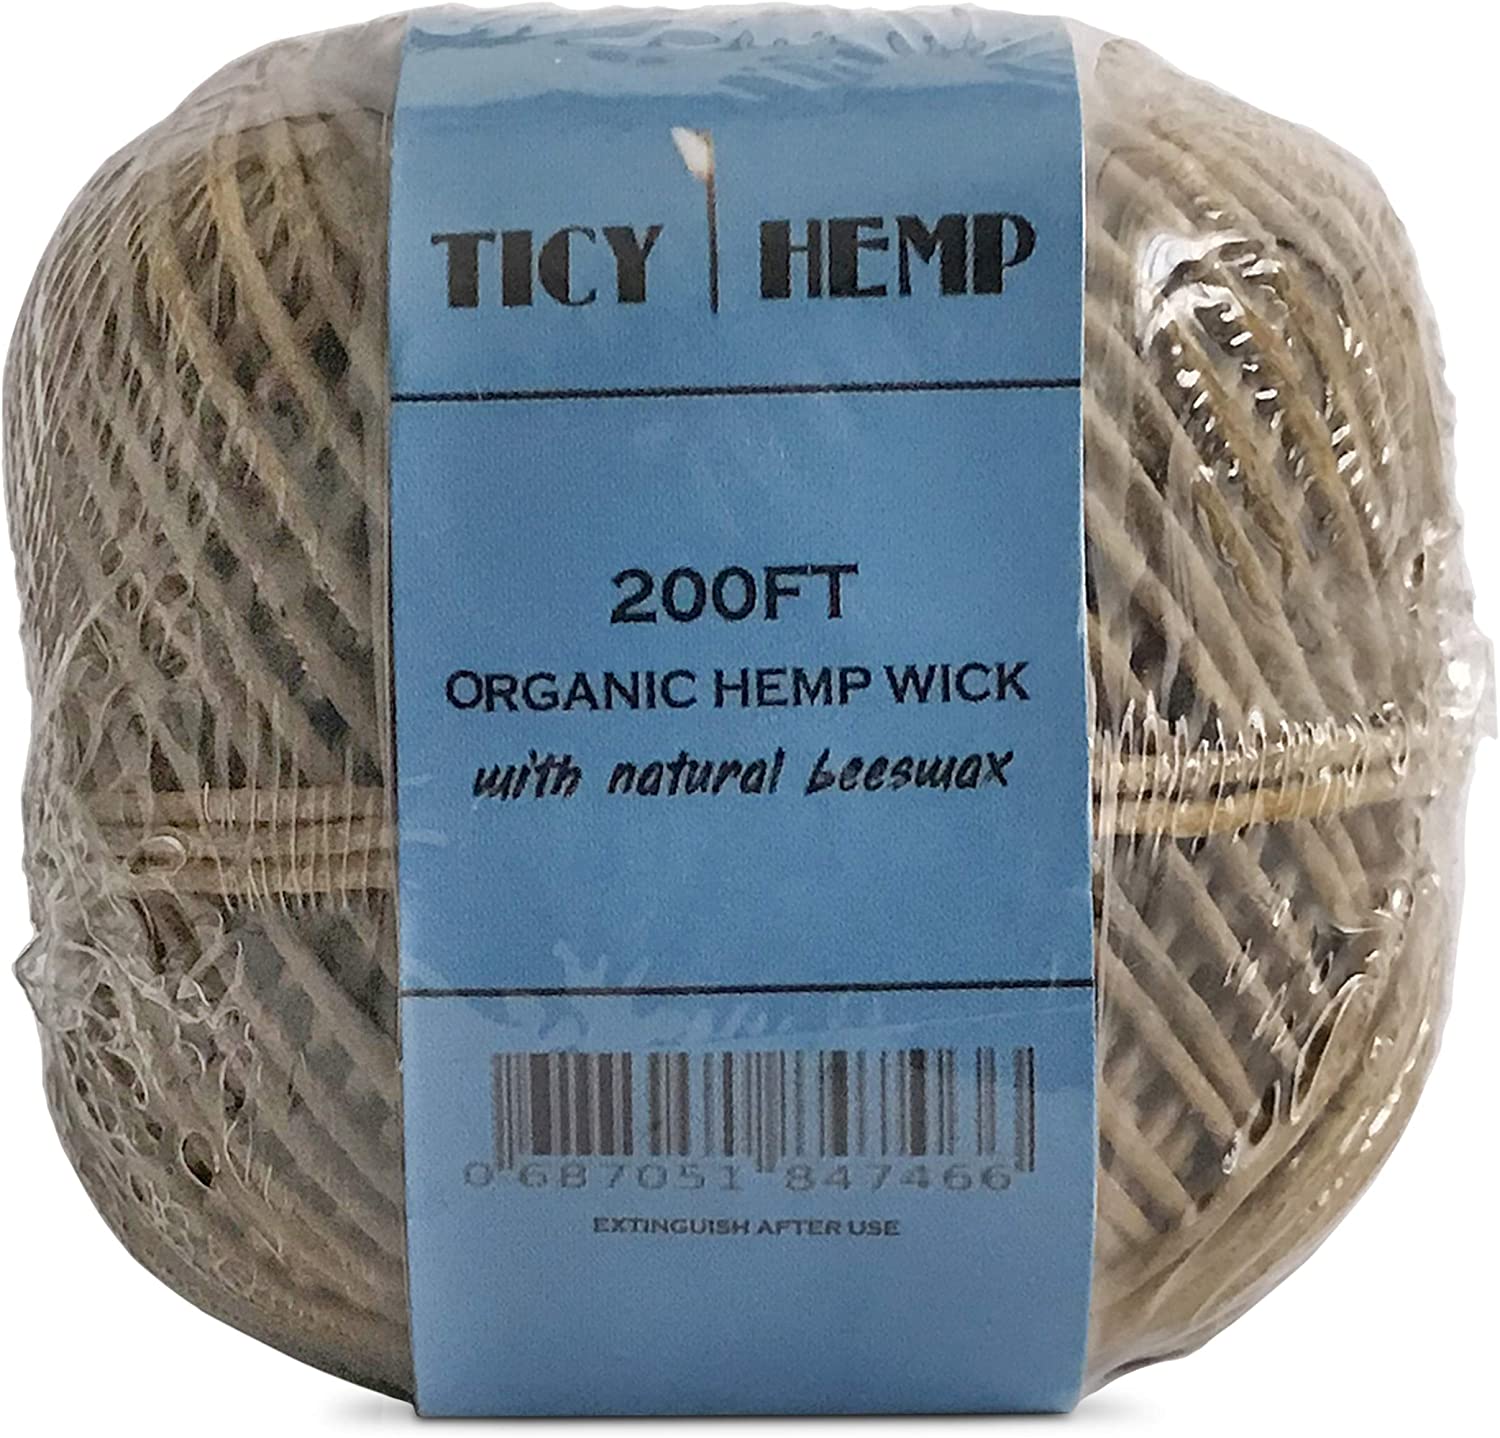 Six (6) 200FT/60M Hemp Wick Rolls With Organic BEESWAX, Great Butane  Replacement & Perfect For DYI Candle Wicks For Candle Making, Slow Burning,  Low Smoke Great For Candle Wicks. (1mm THICK) 